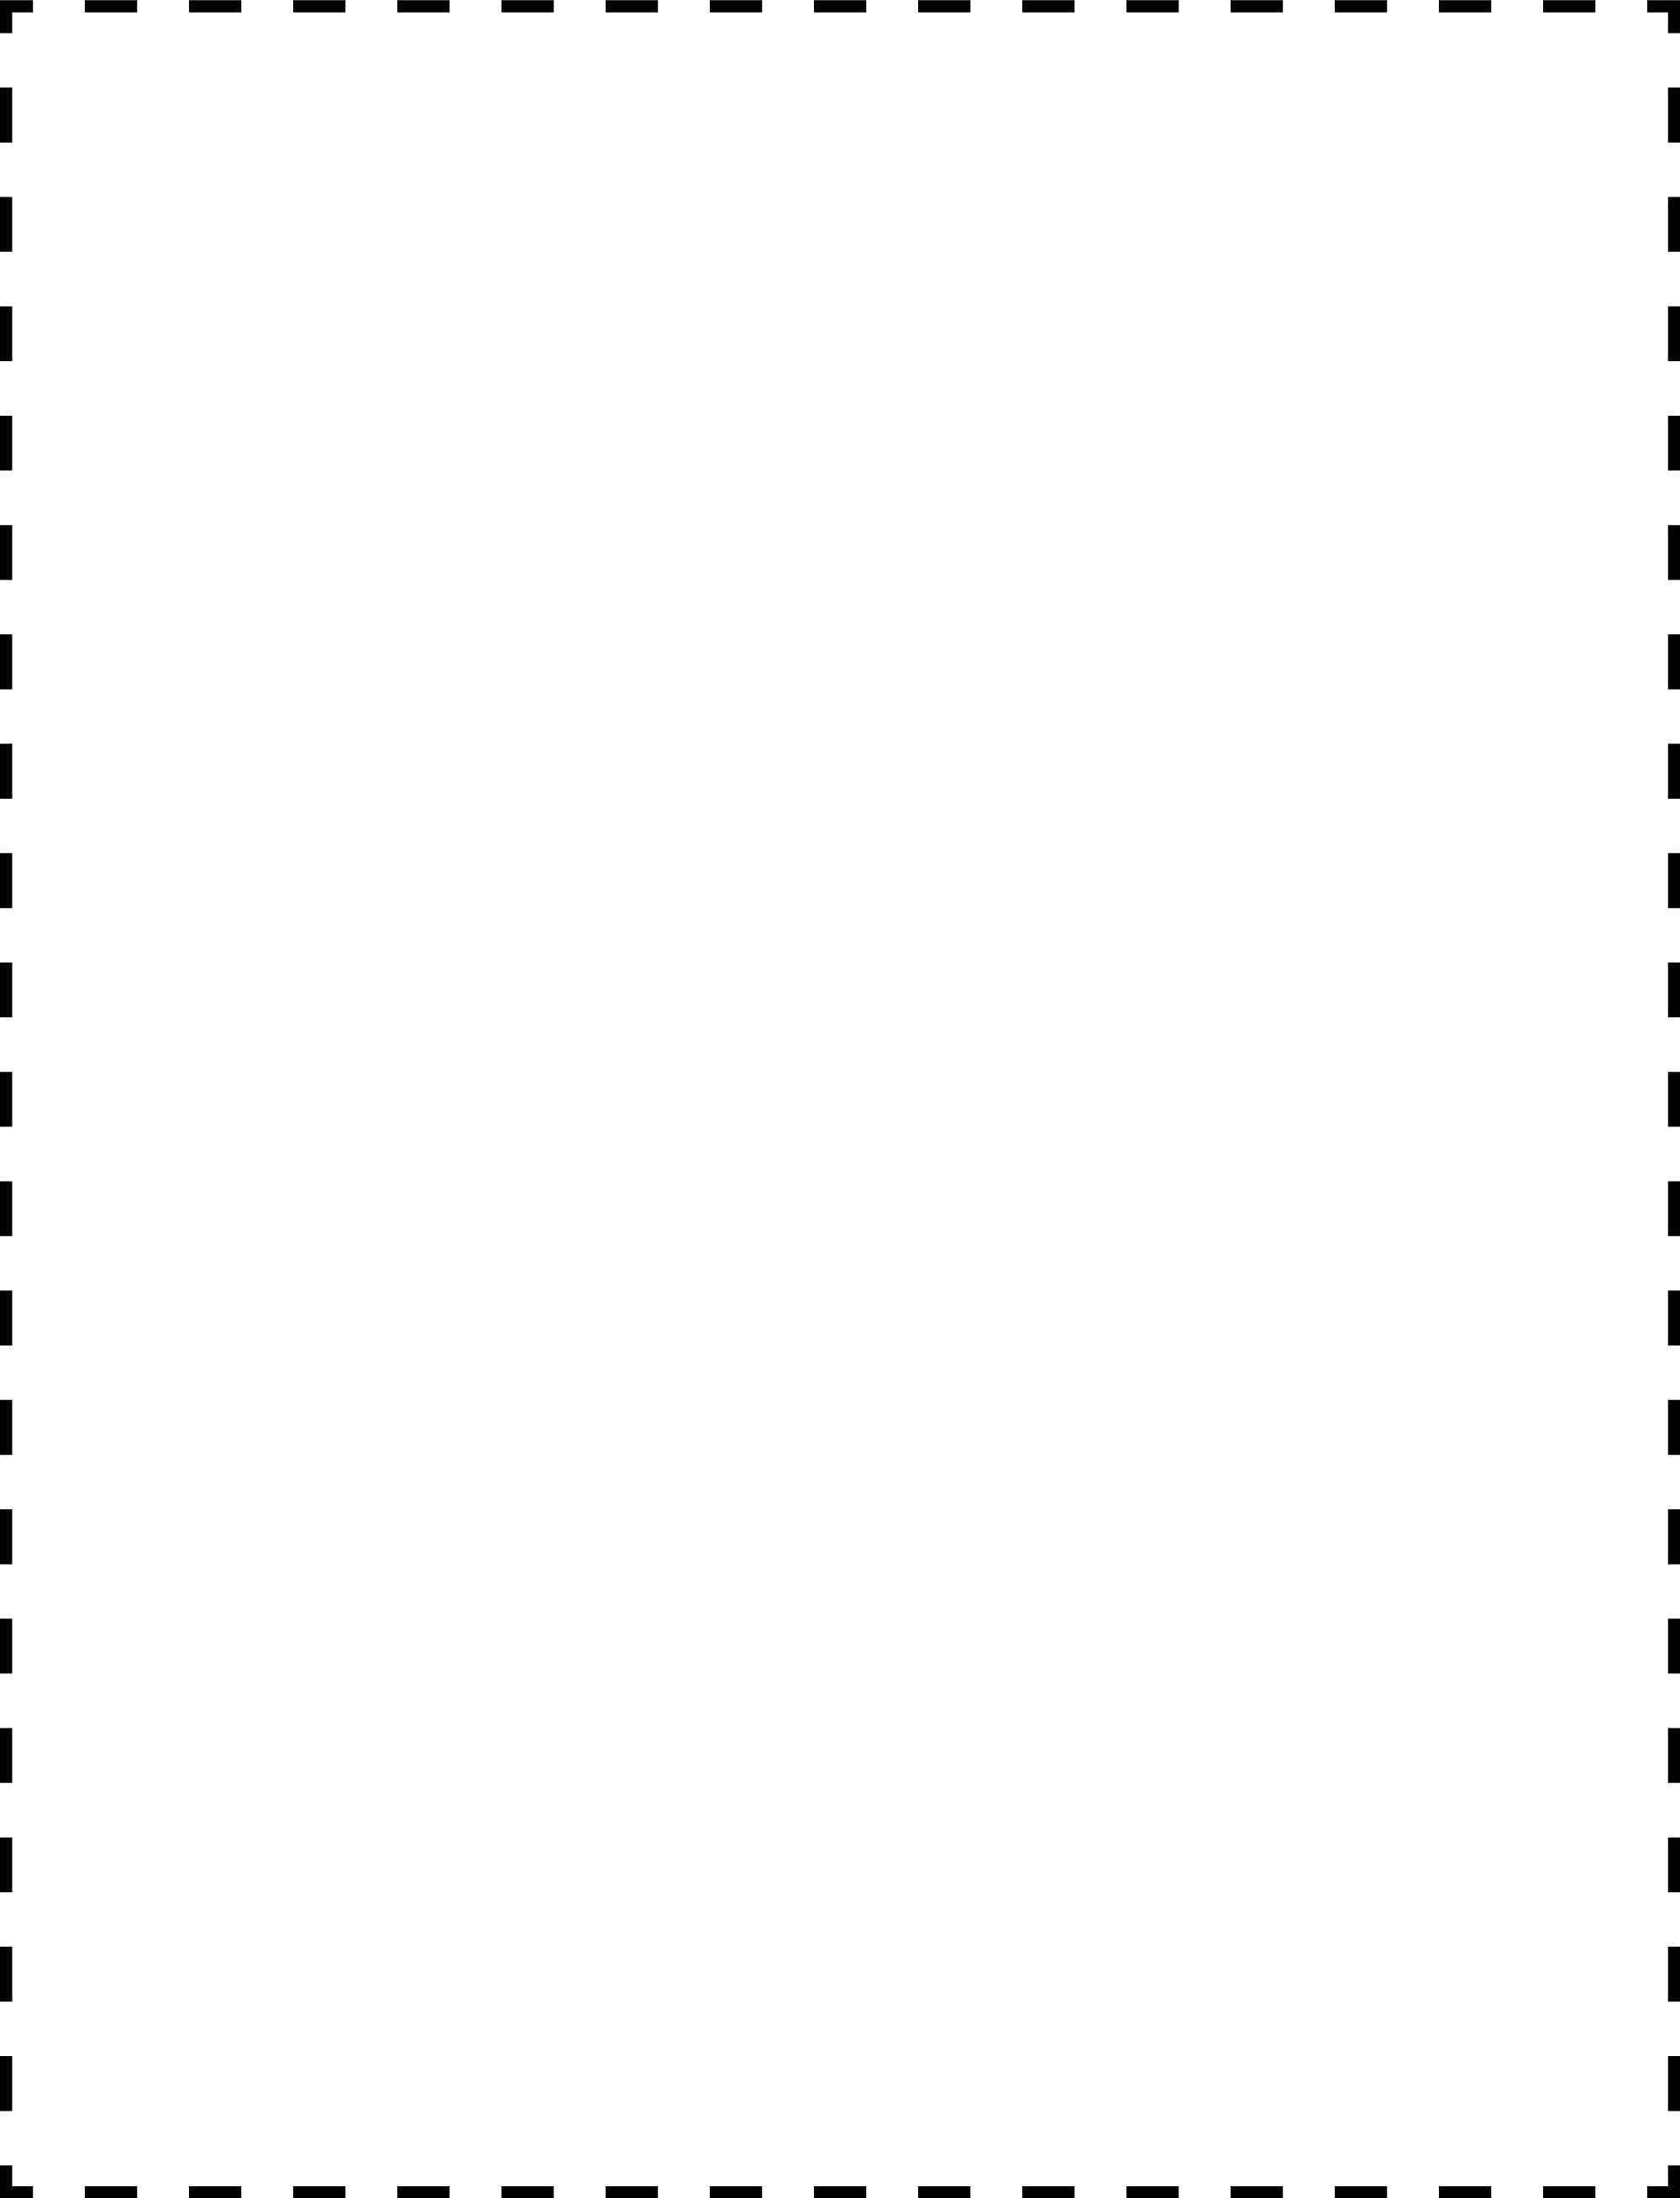 2398-coupon-outline-4x5-k.png